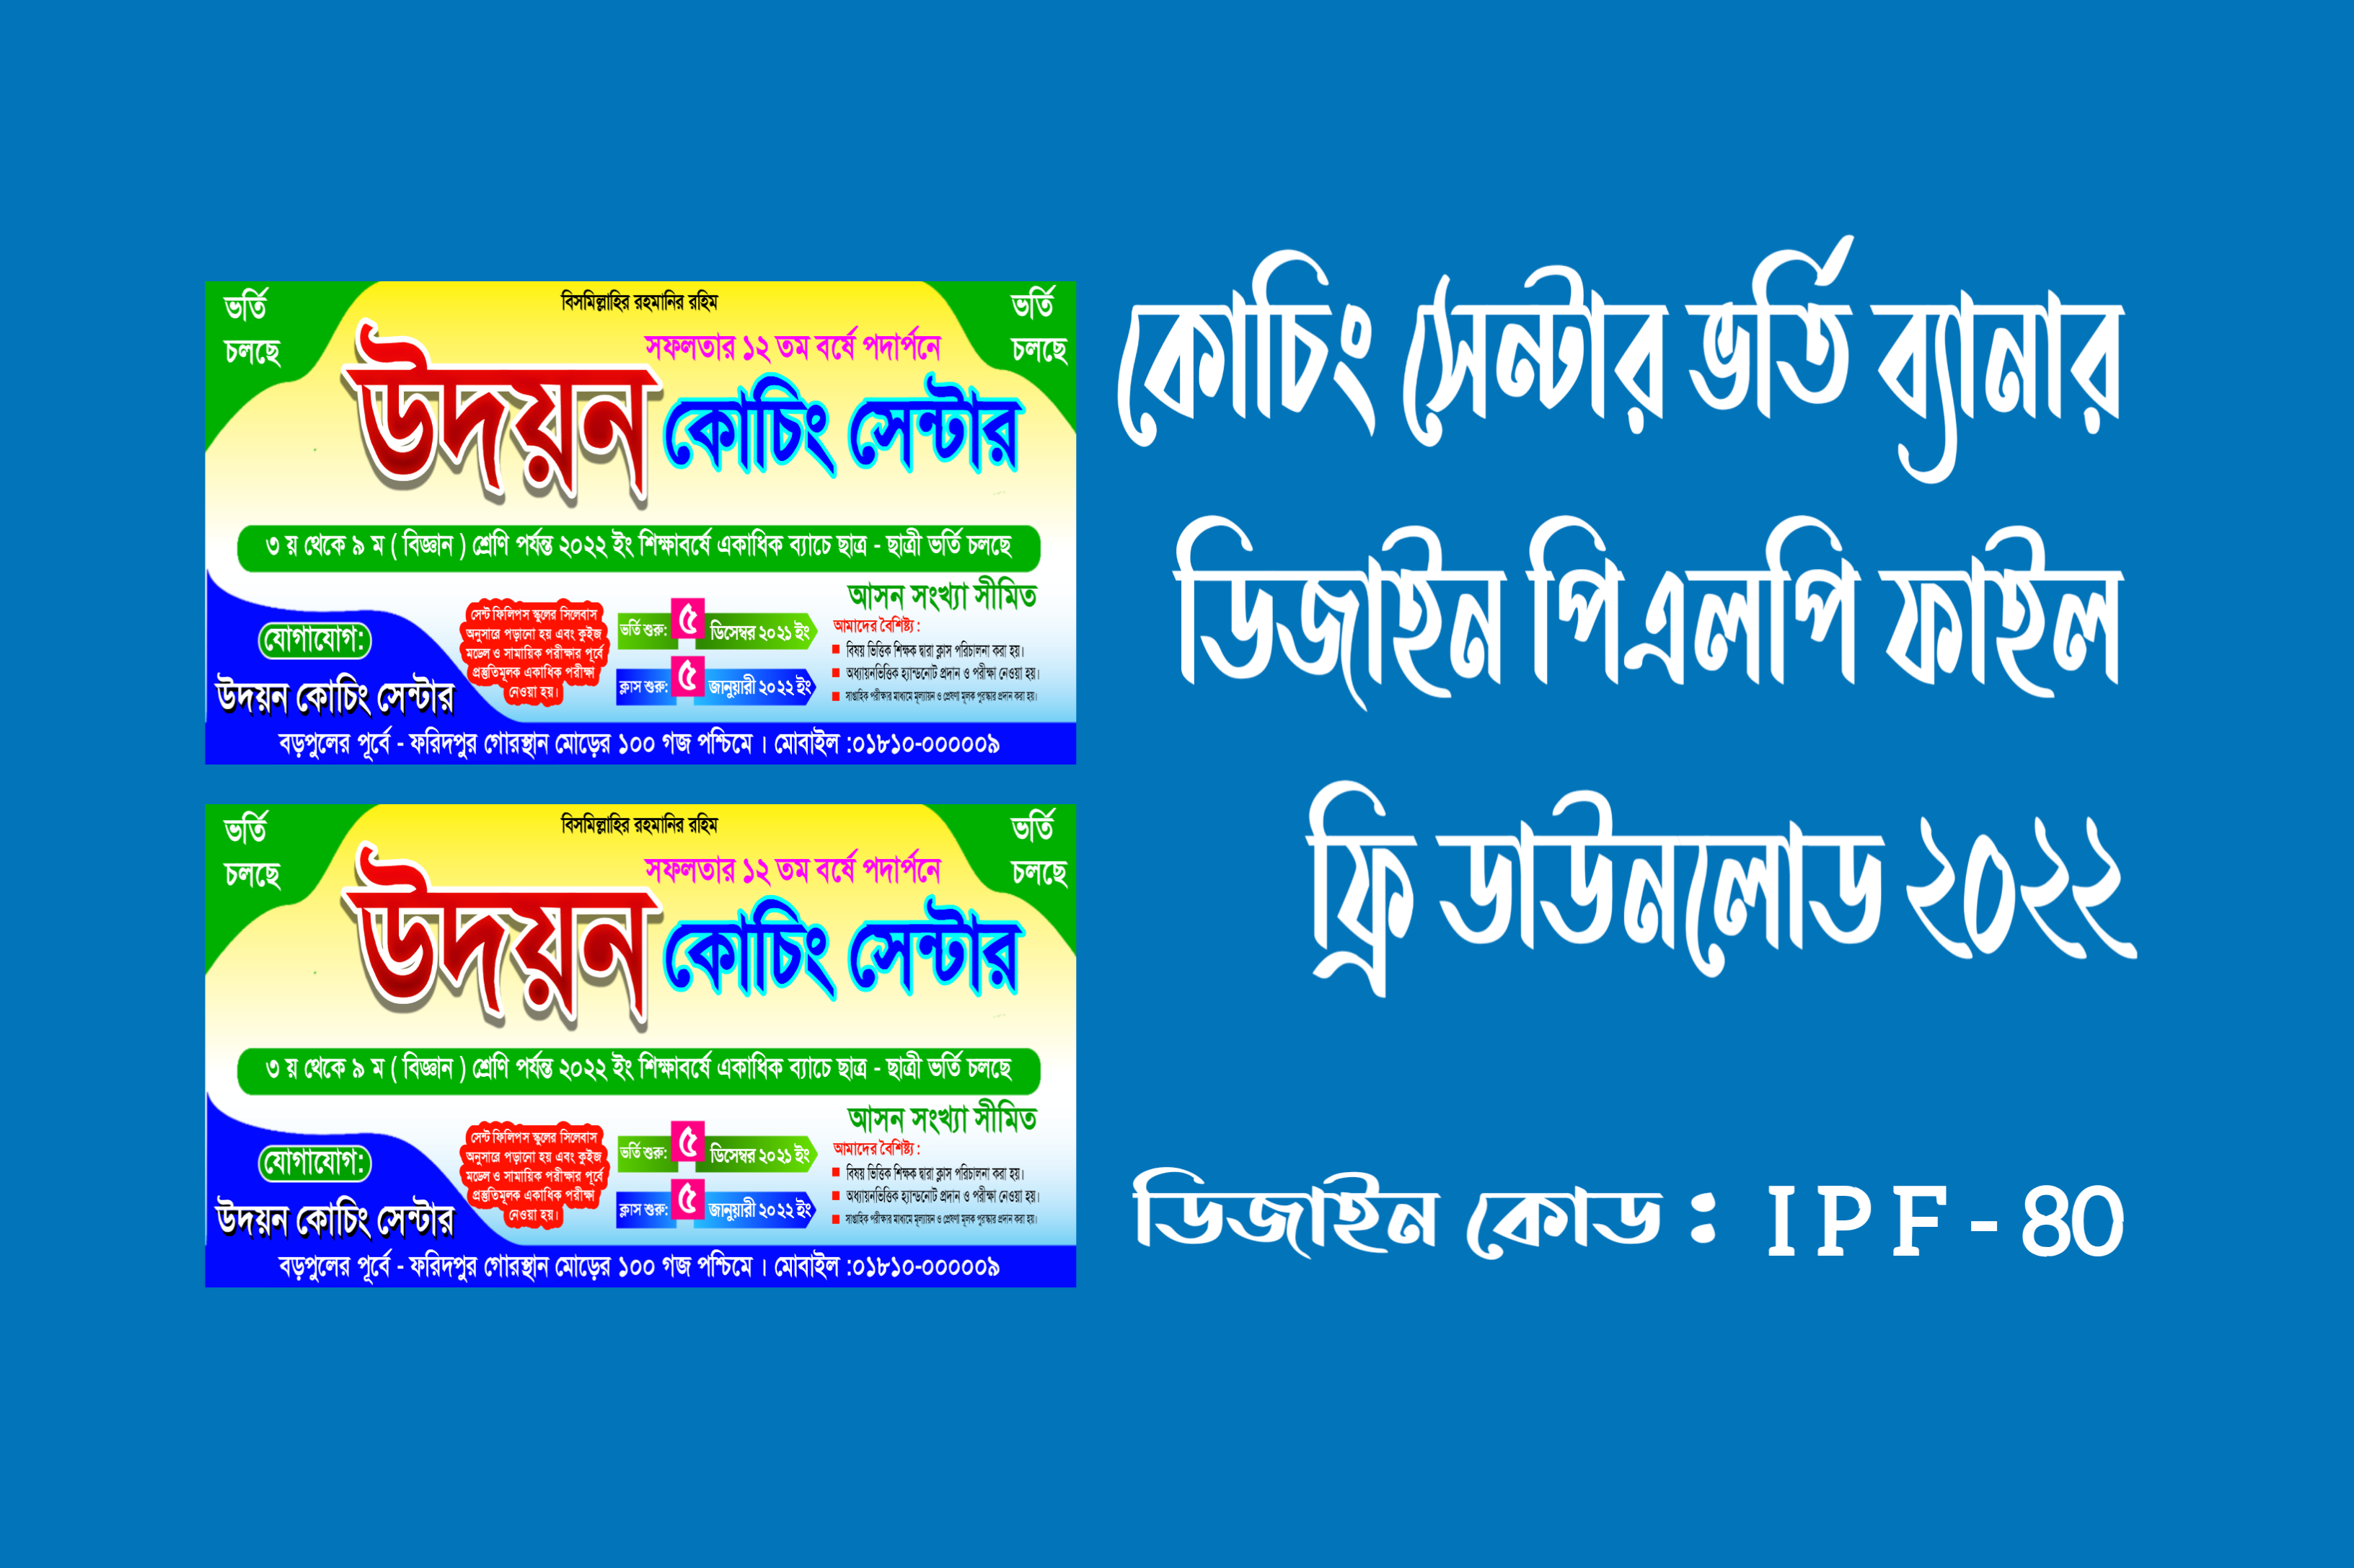 Coaching Center Admission Banner Design PLP File Free Download 2022 - Islamic Plp File - I P F - 80